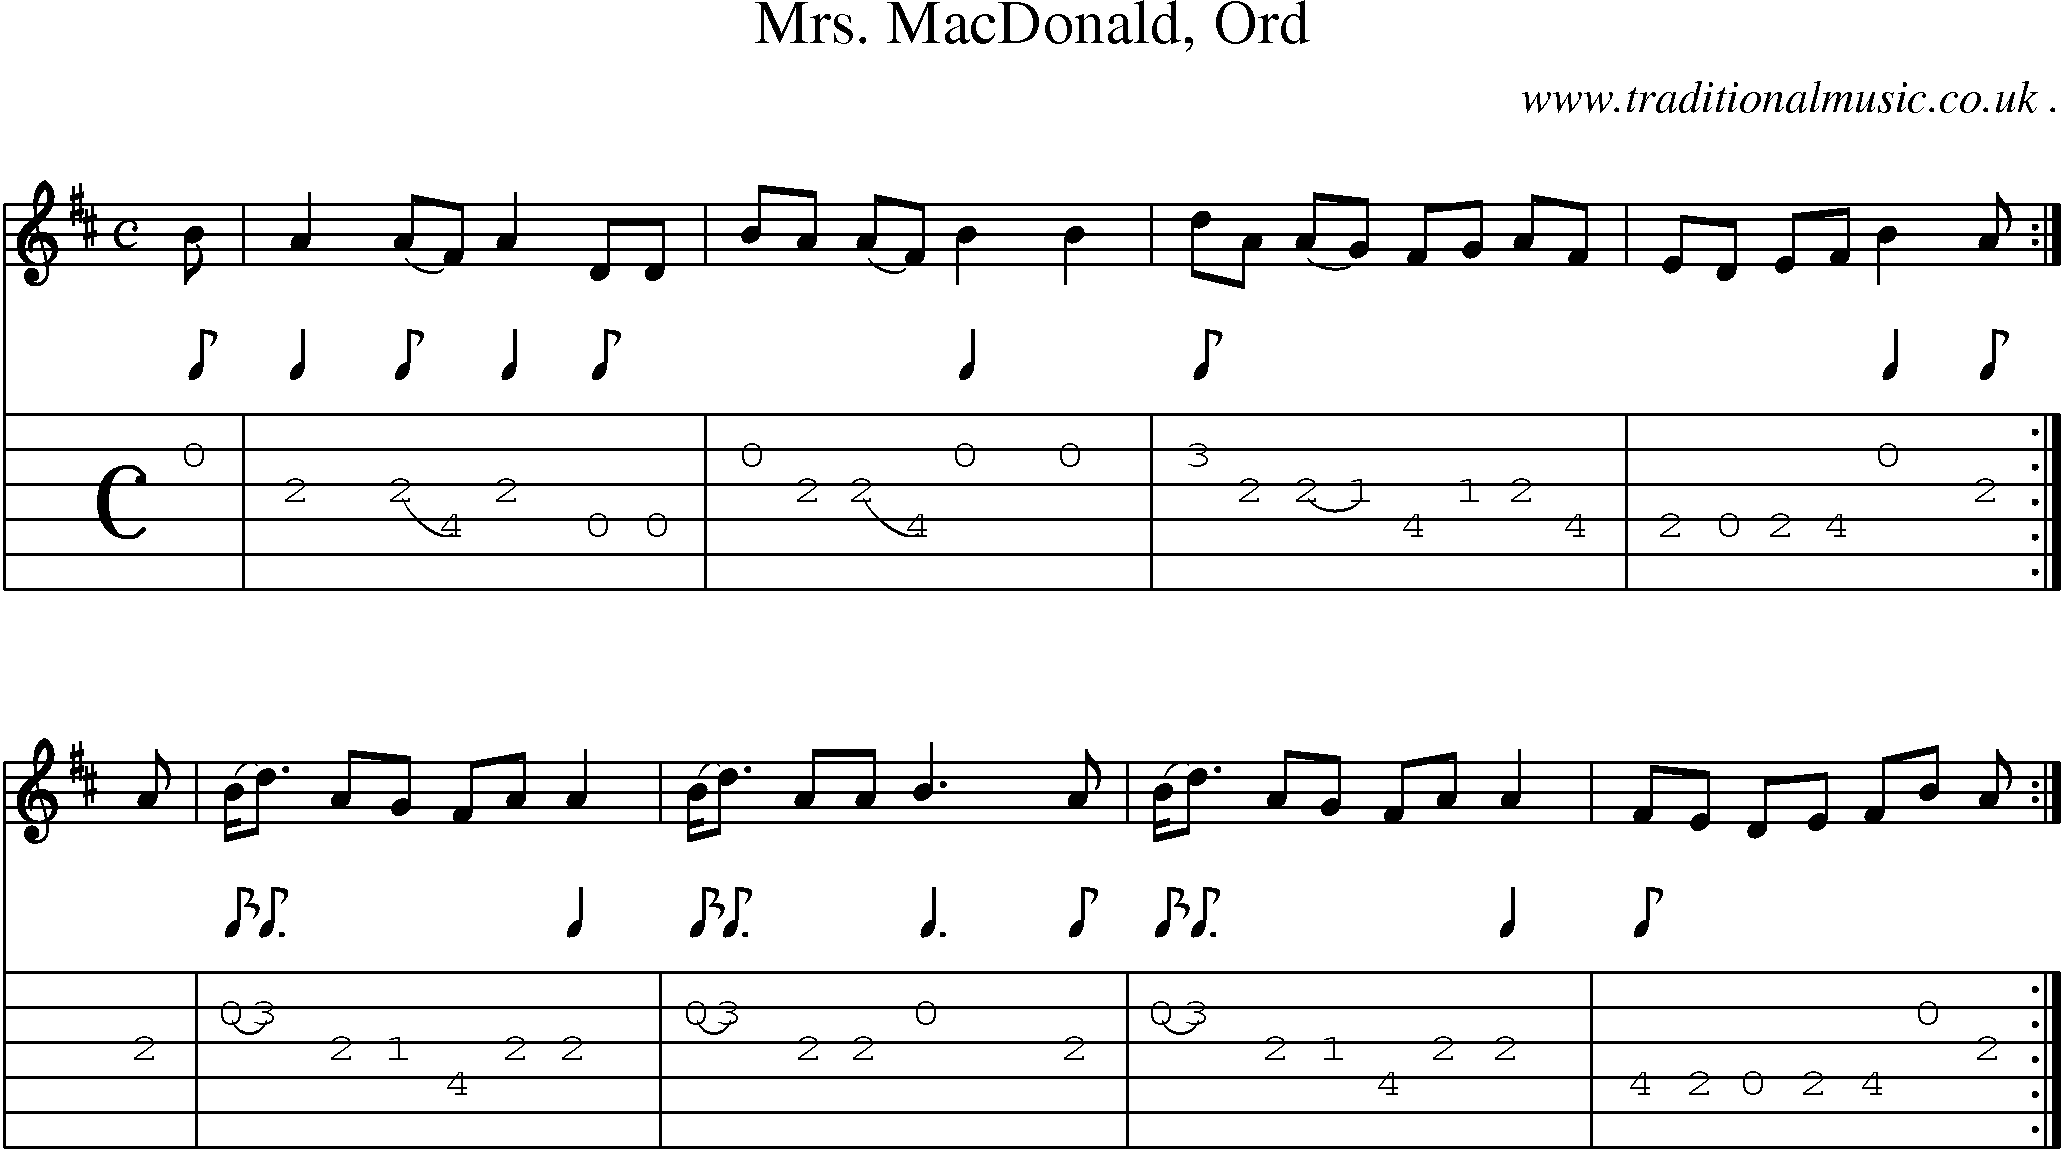 Sheet-music  score, Chords and Guitar Tabs for Mrs Macdonald Ord